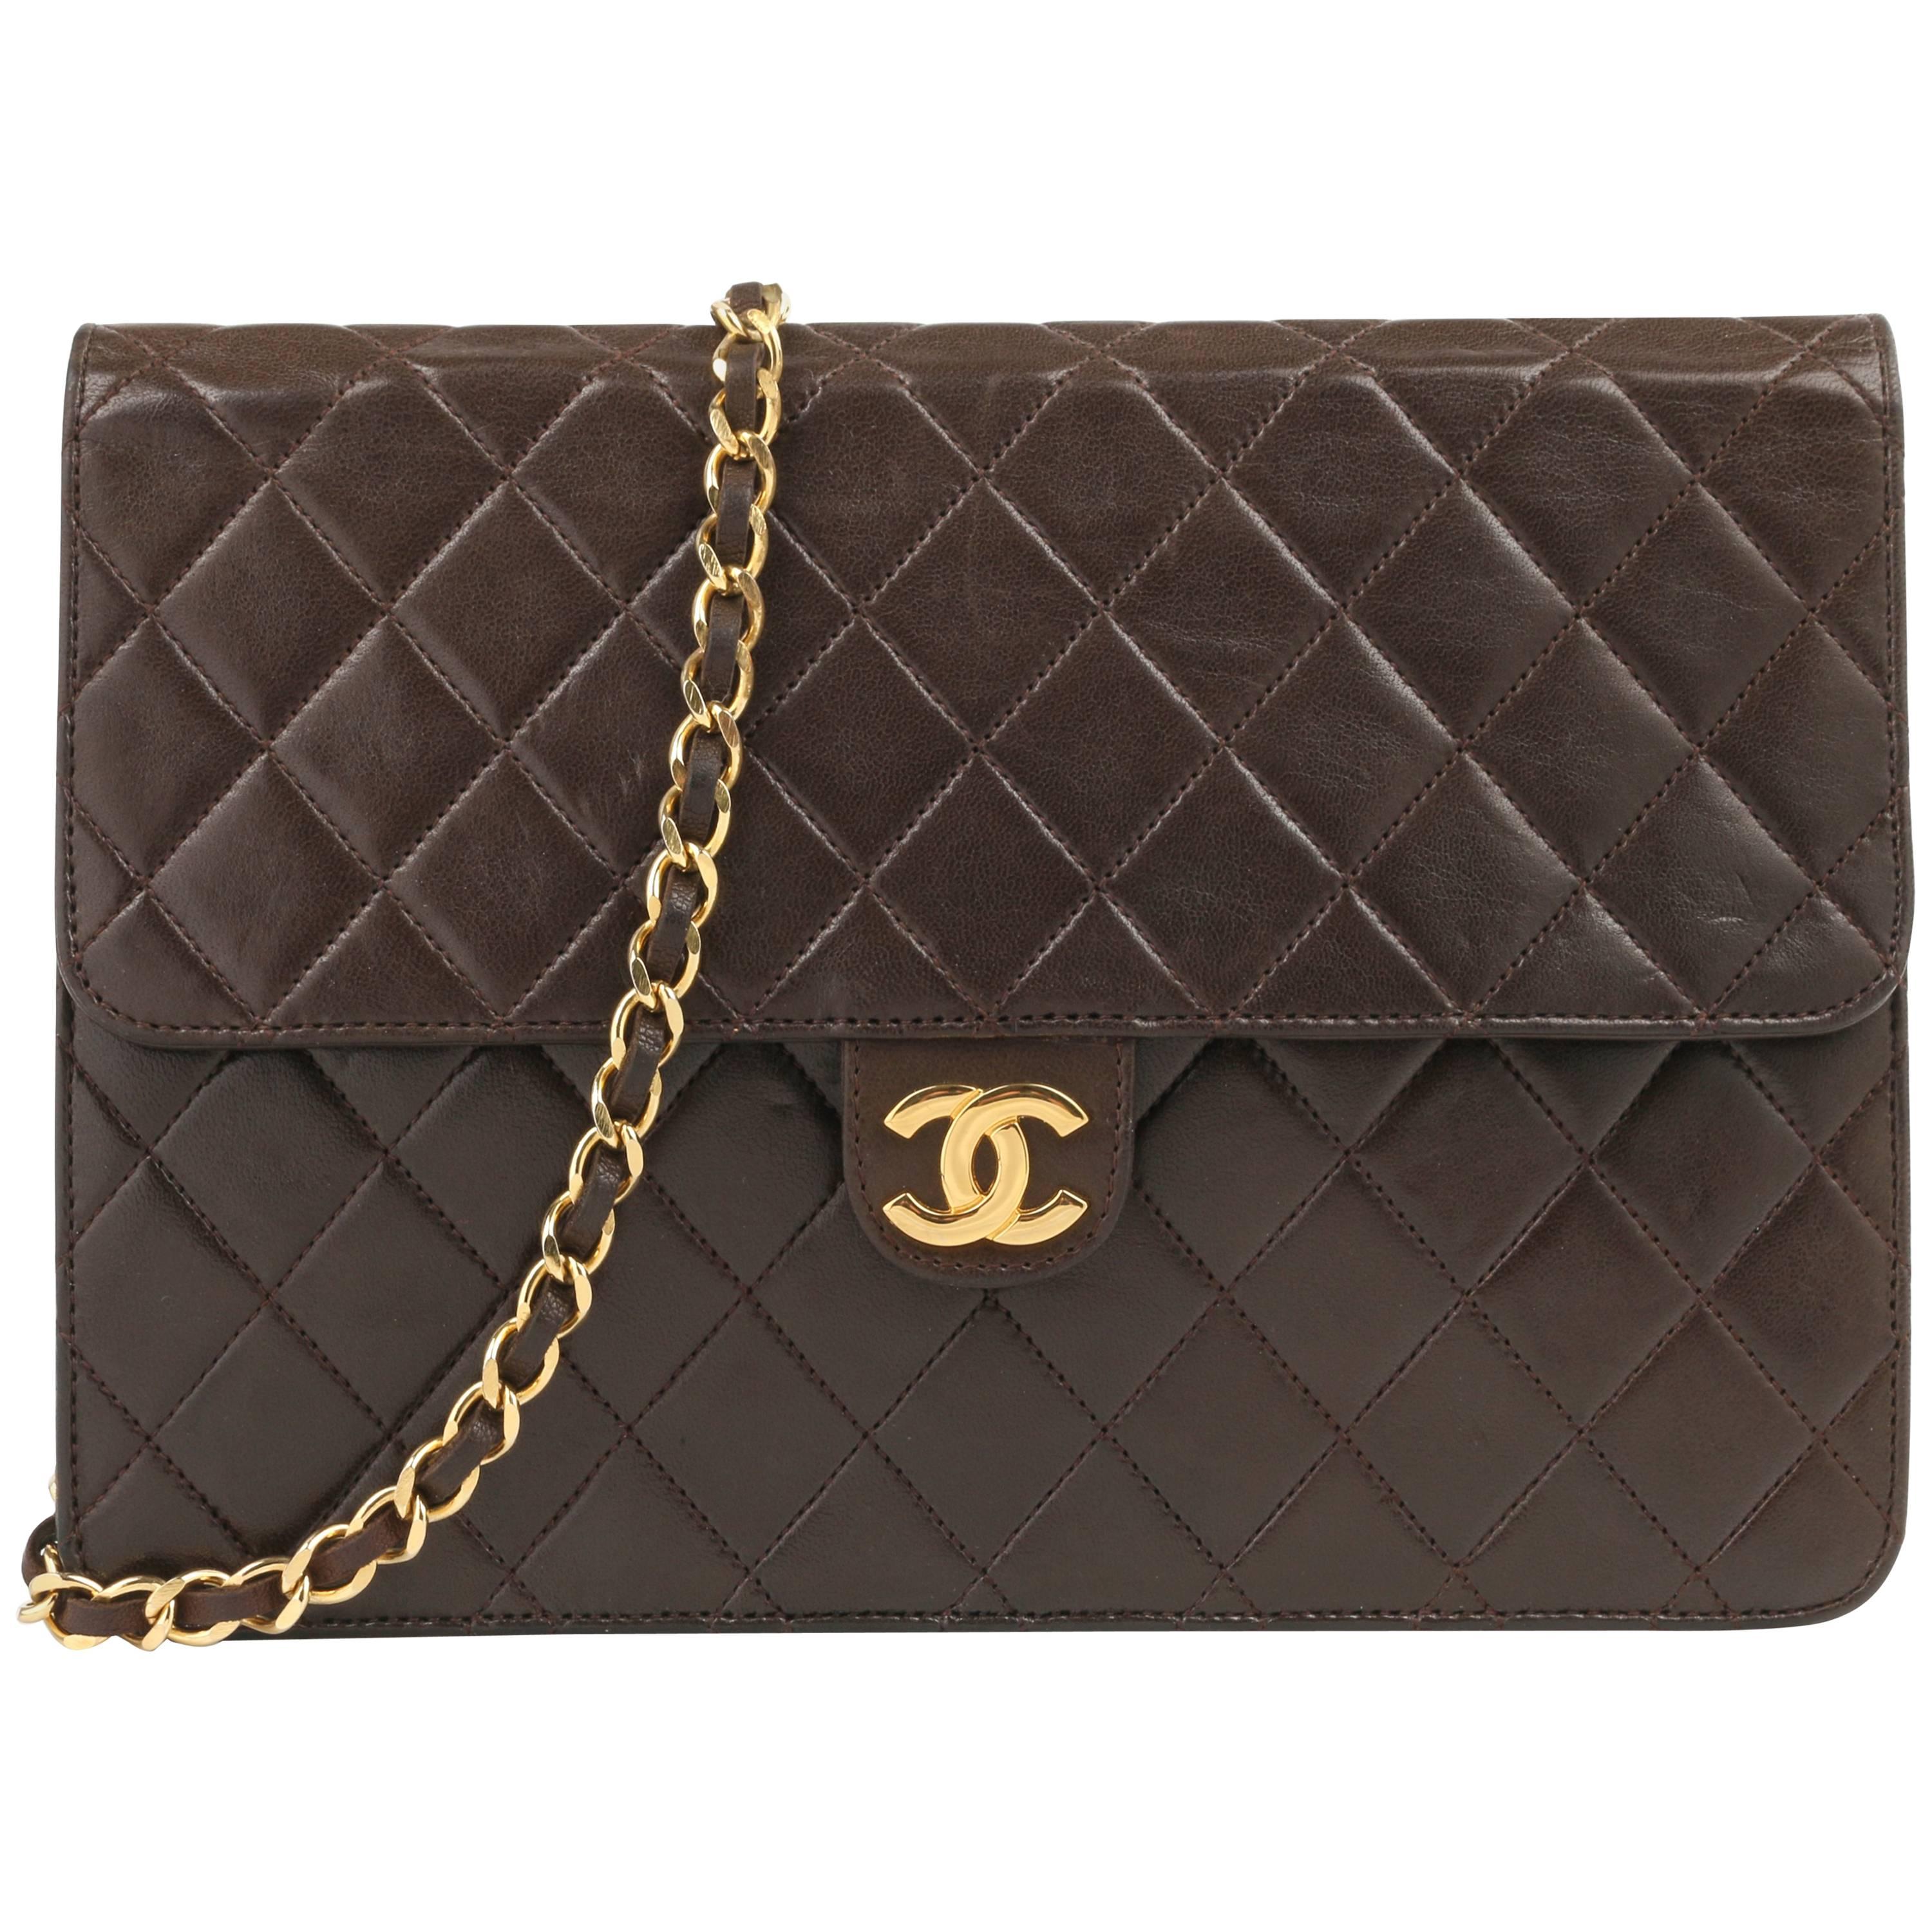 CHANEL c.1990's Brown Diamond Quilted Lambskin Leather Classic Flap Bag